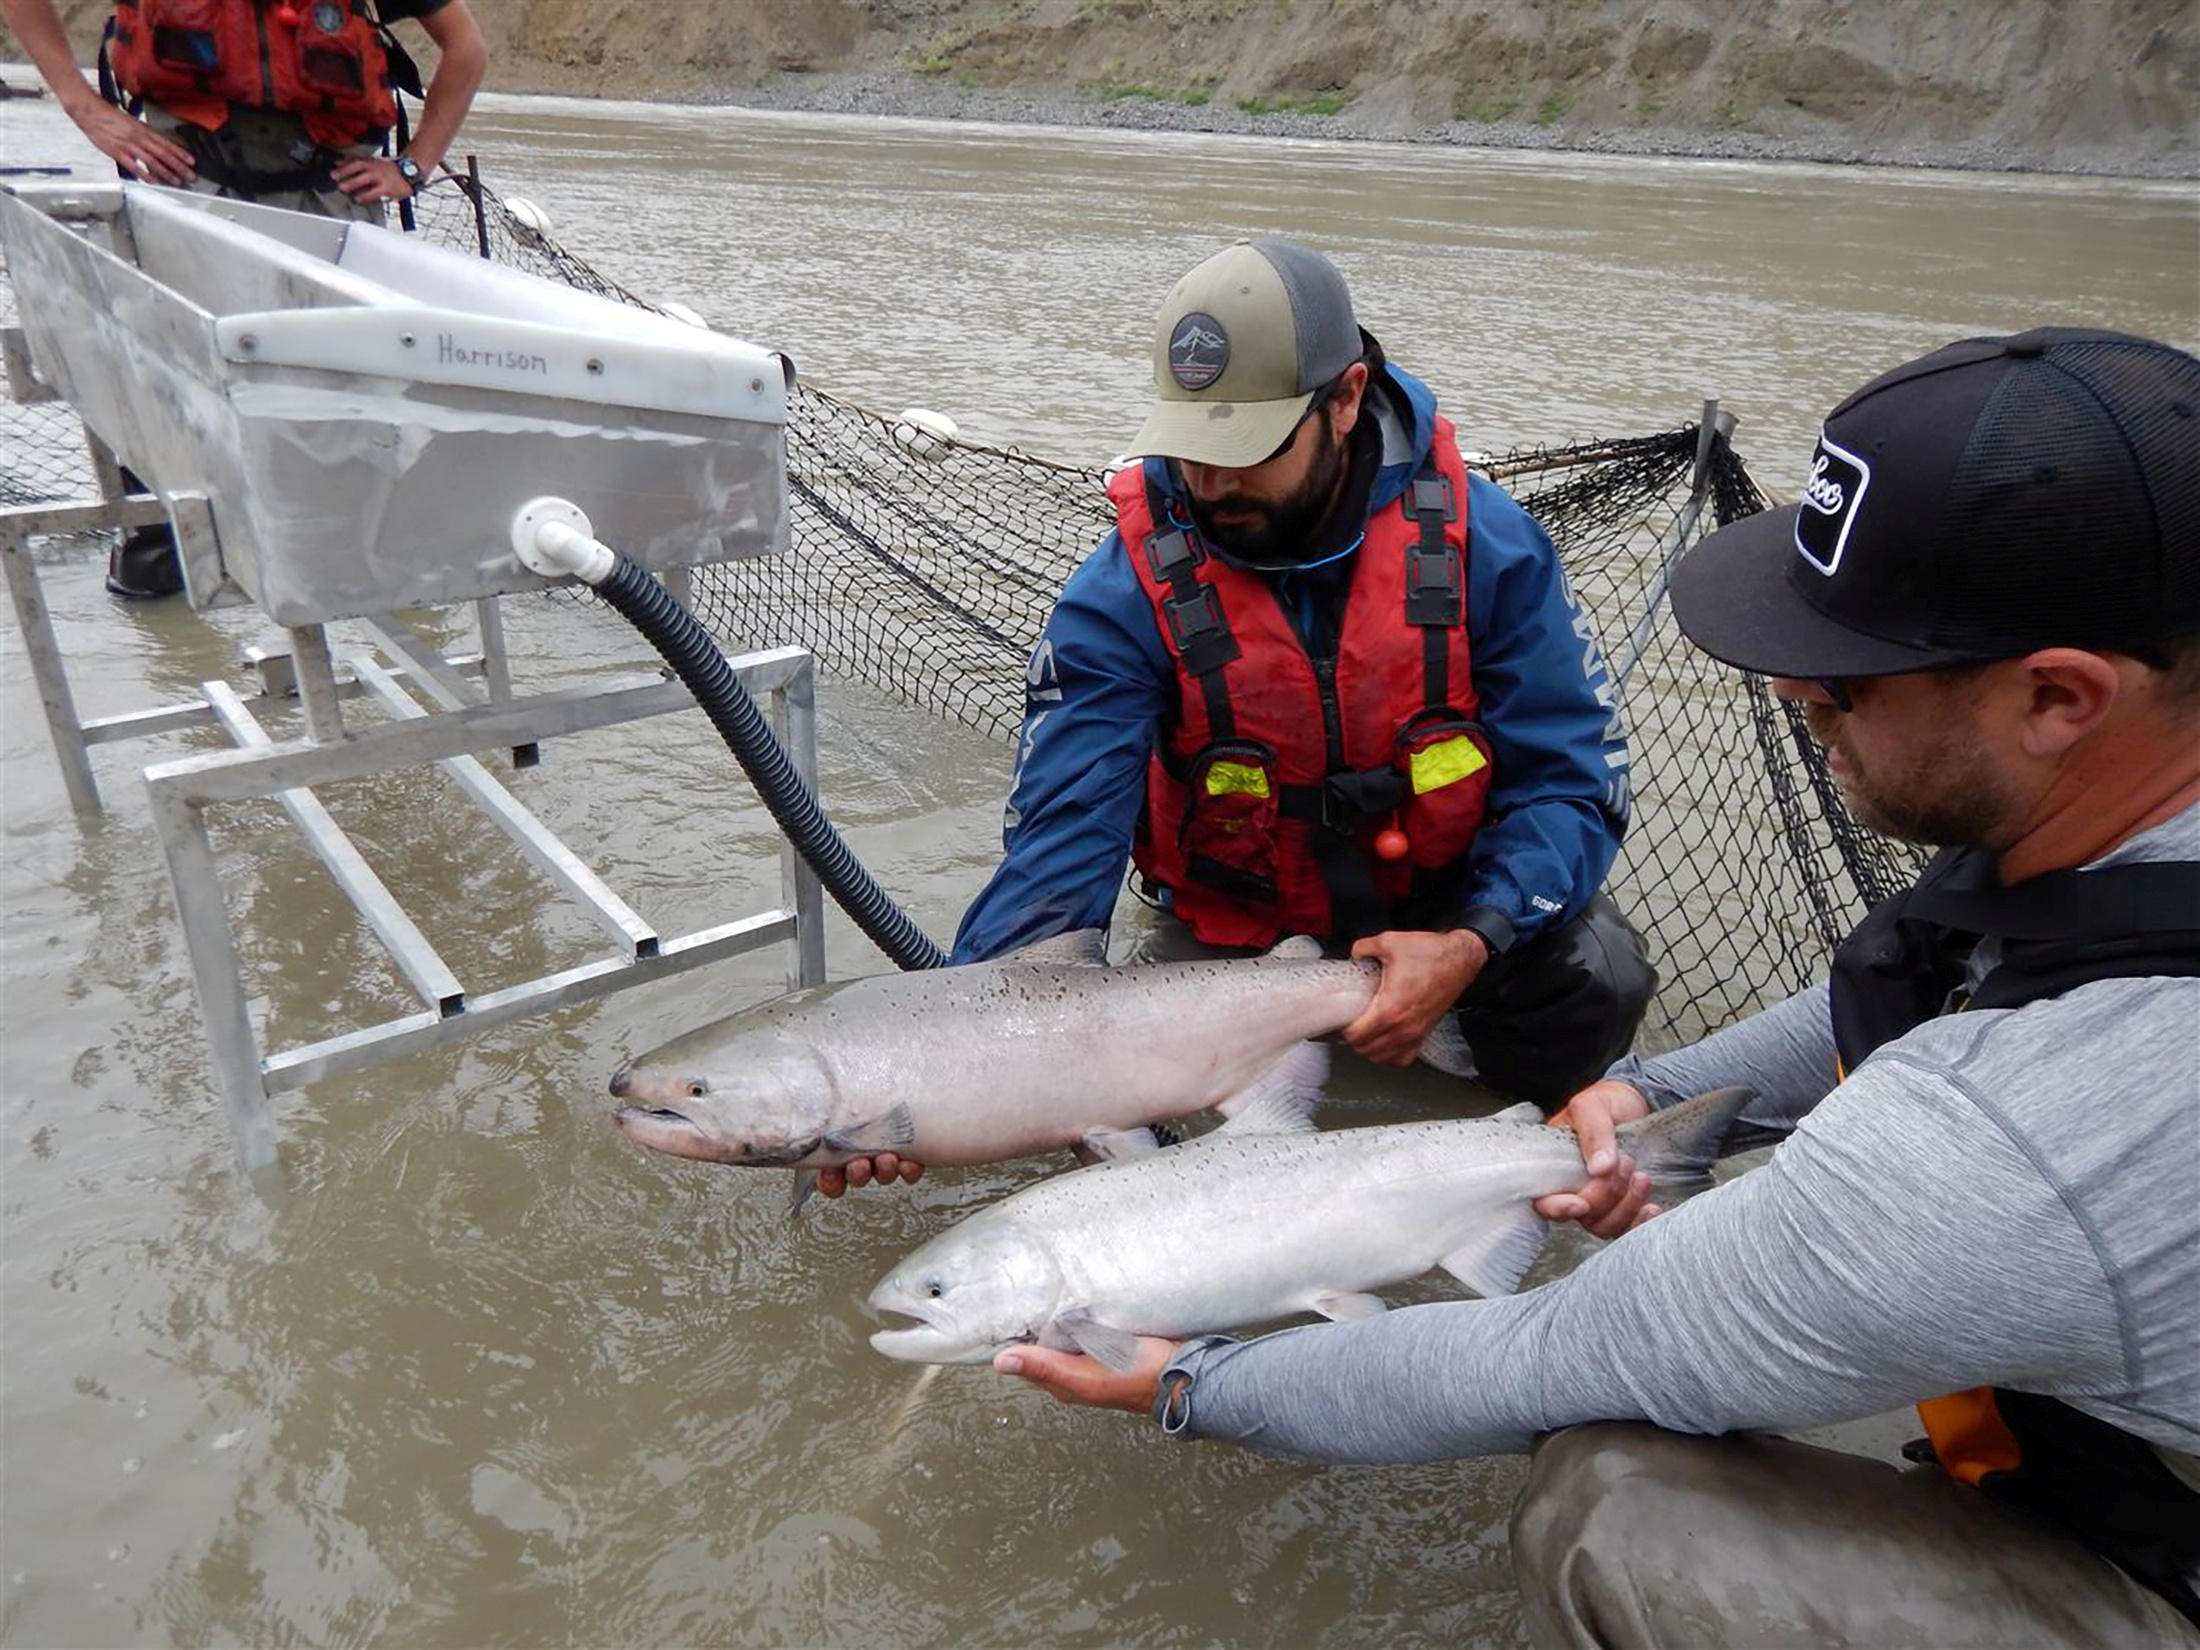 Migrating salmon are held during a tagging operation near the Big Bar landslide